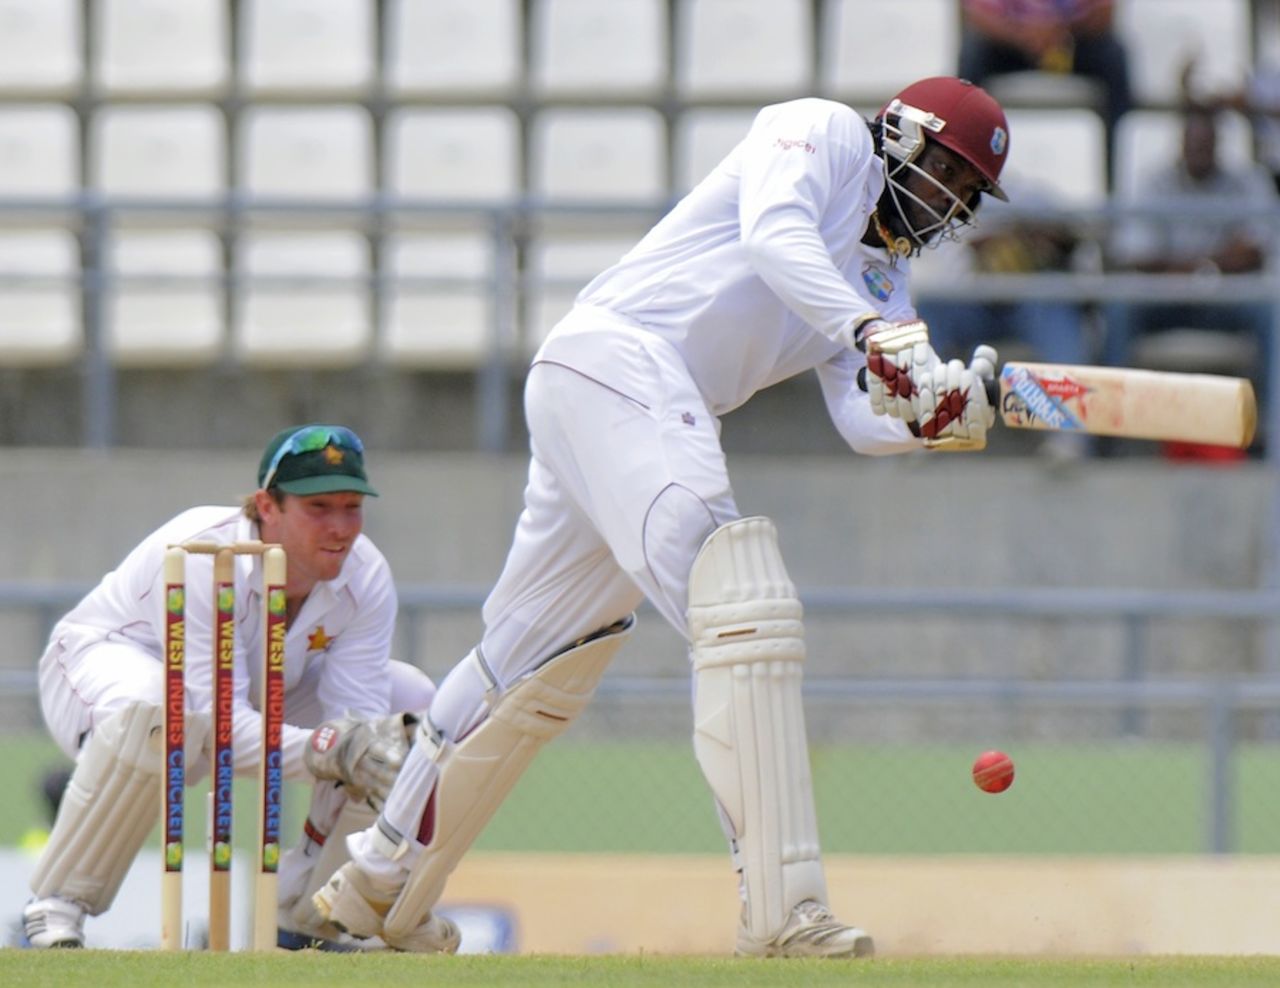 Chris Gayle scored his 15th Test century, West Indies v Zimbabwe, 2nd Test, Roseau, 2nd day, March 21, 2013